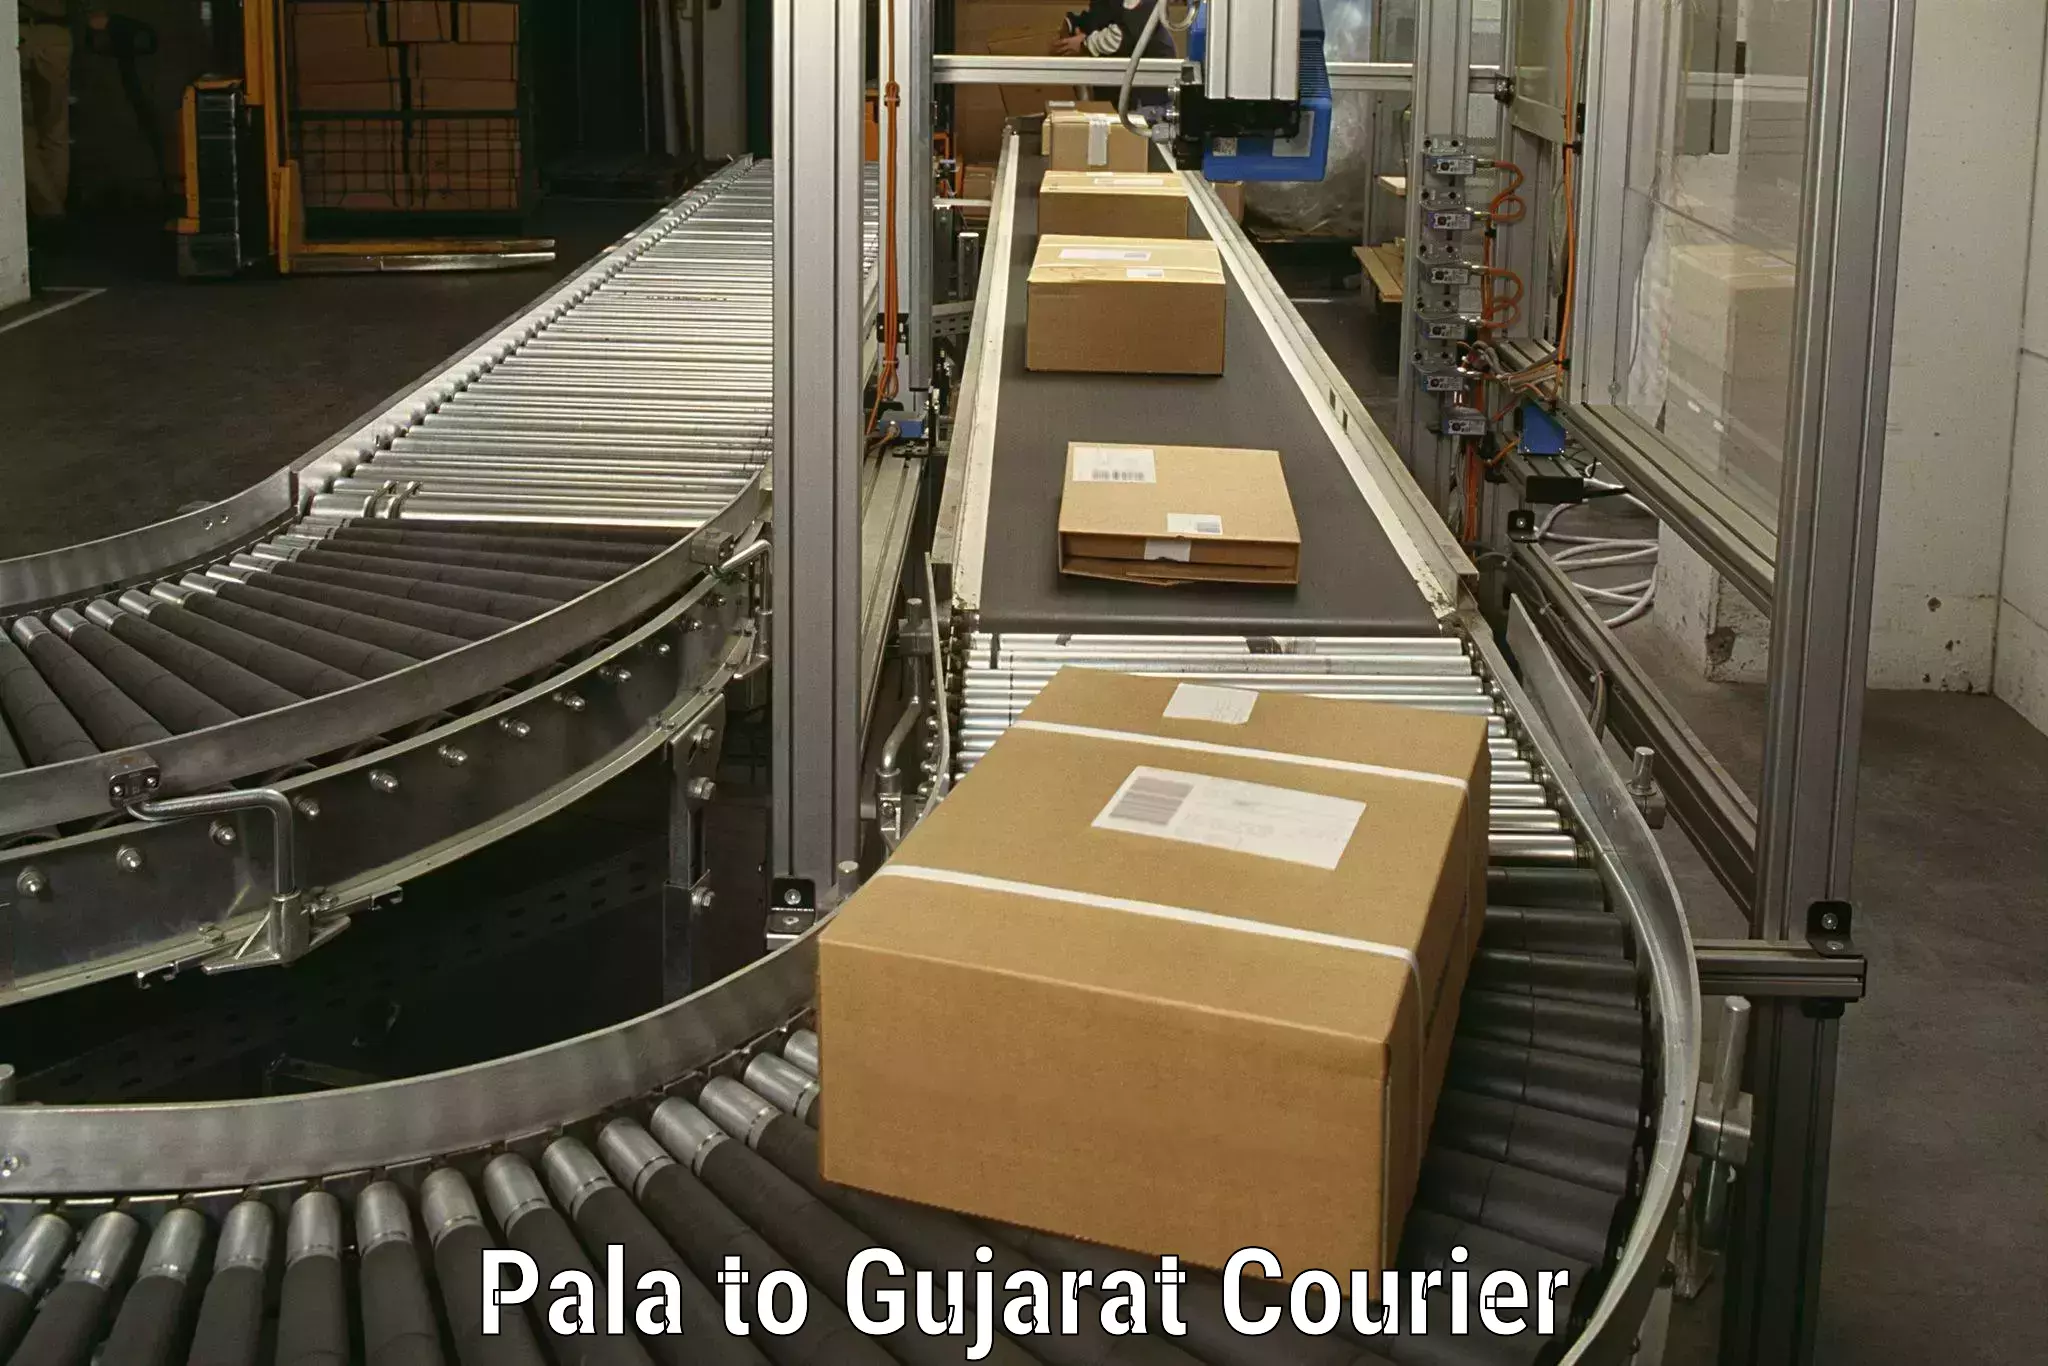 Furniture delivery service Pala to Gujarat